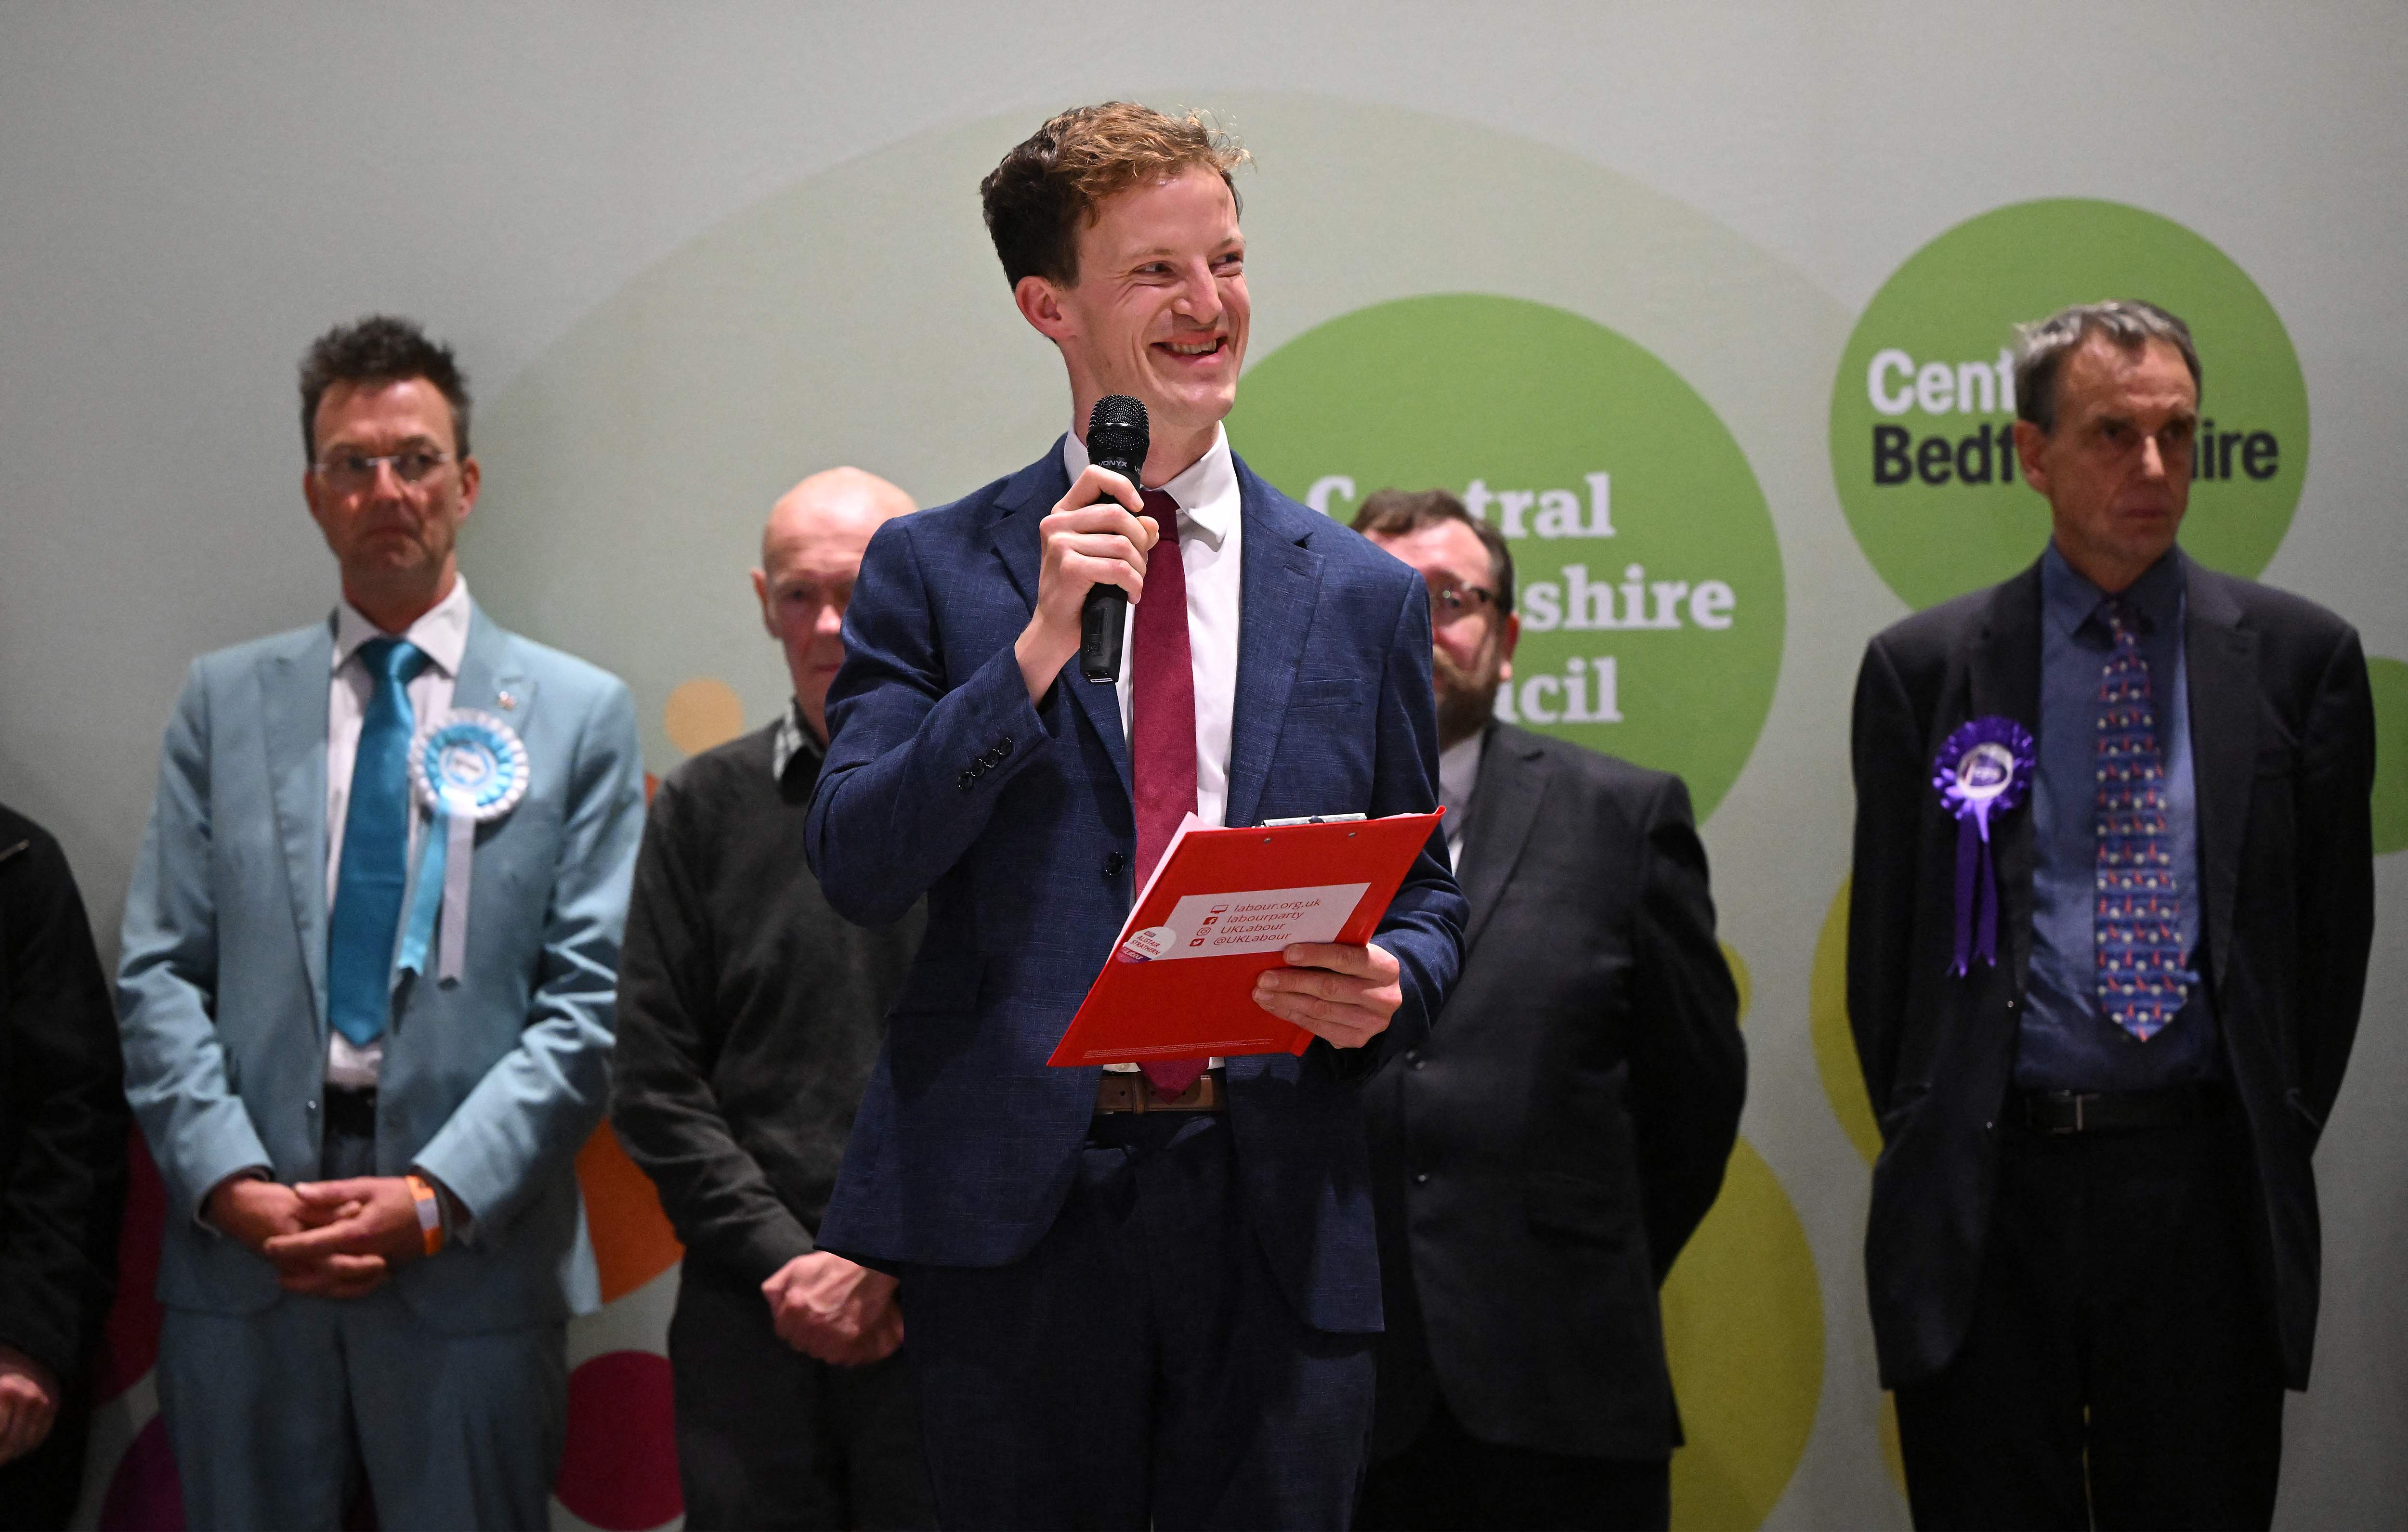 Labour’s winning candidate Alistair Strathern will replace Nadine Dorries as MP for Mid Bedfordshire